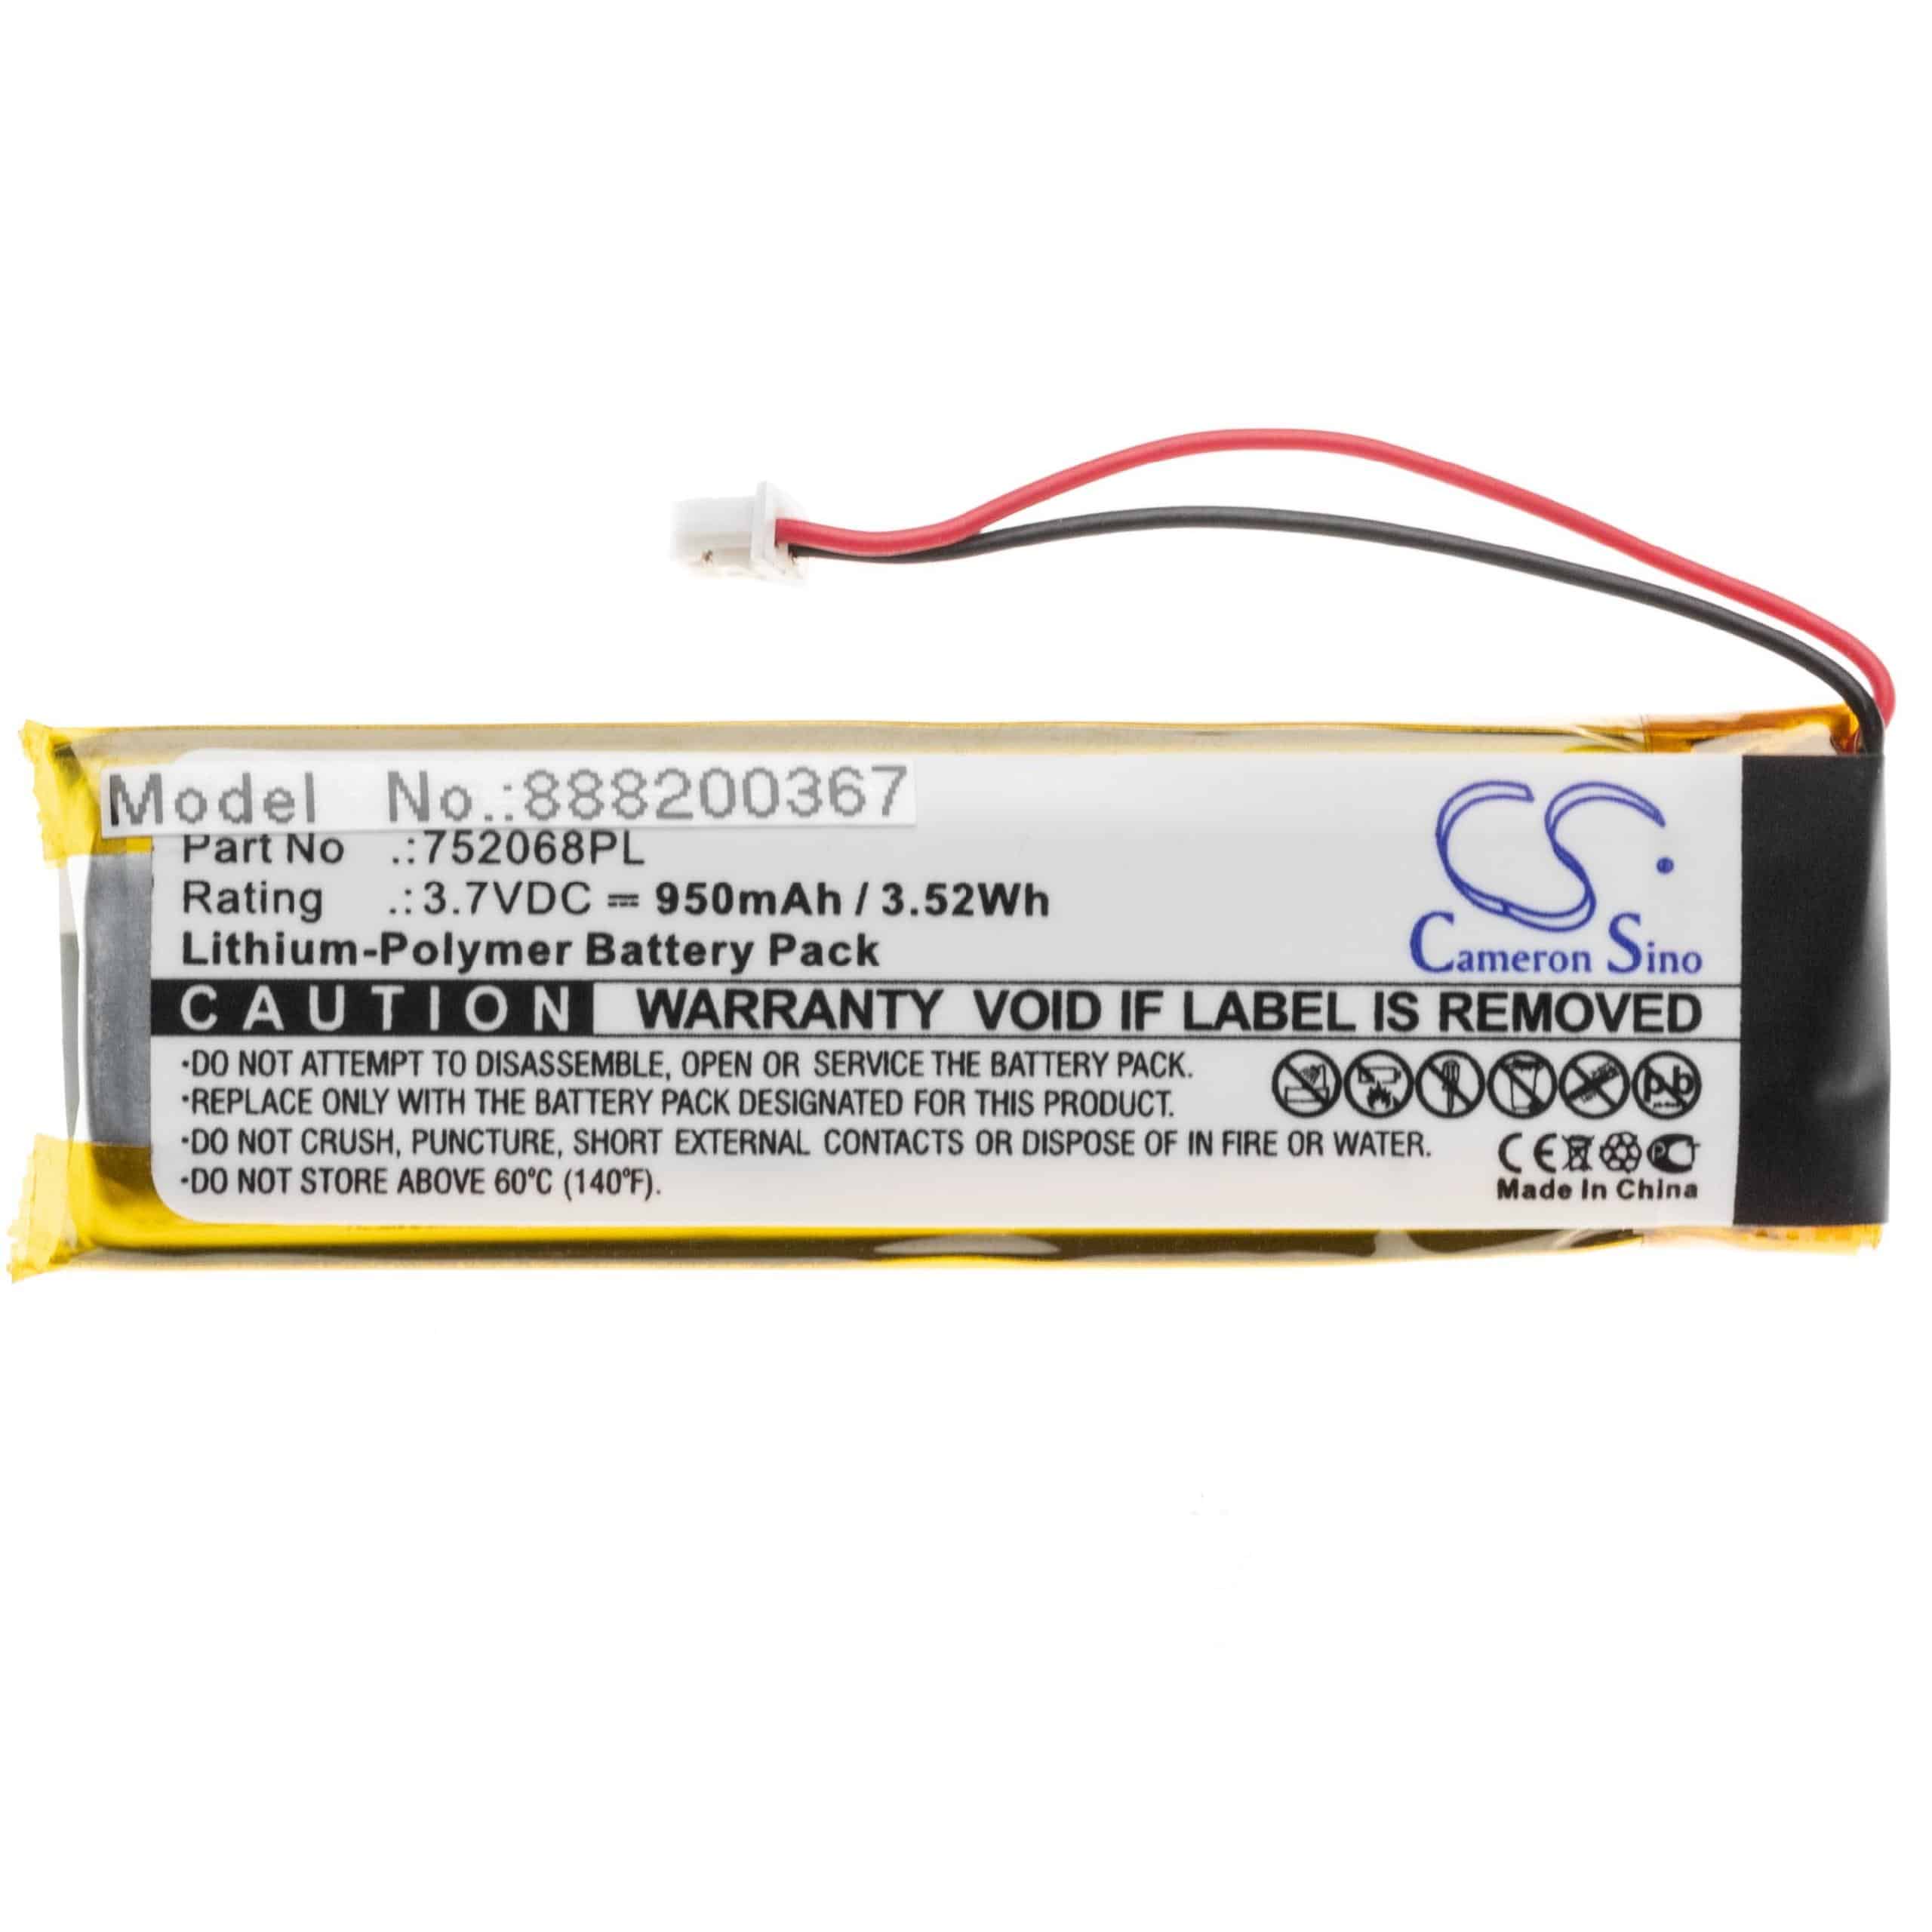 Wireless Headset Battery Replacement for Midland 752068PL - 950mAh 3.7V Li-polymer